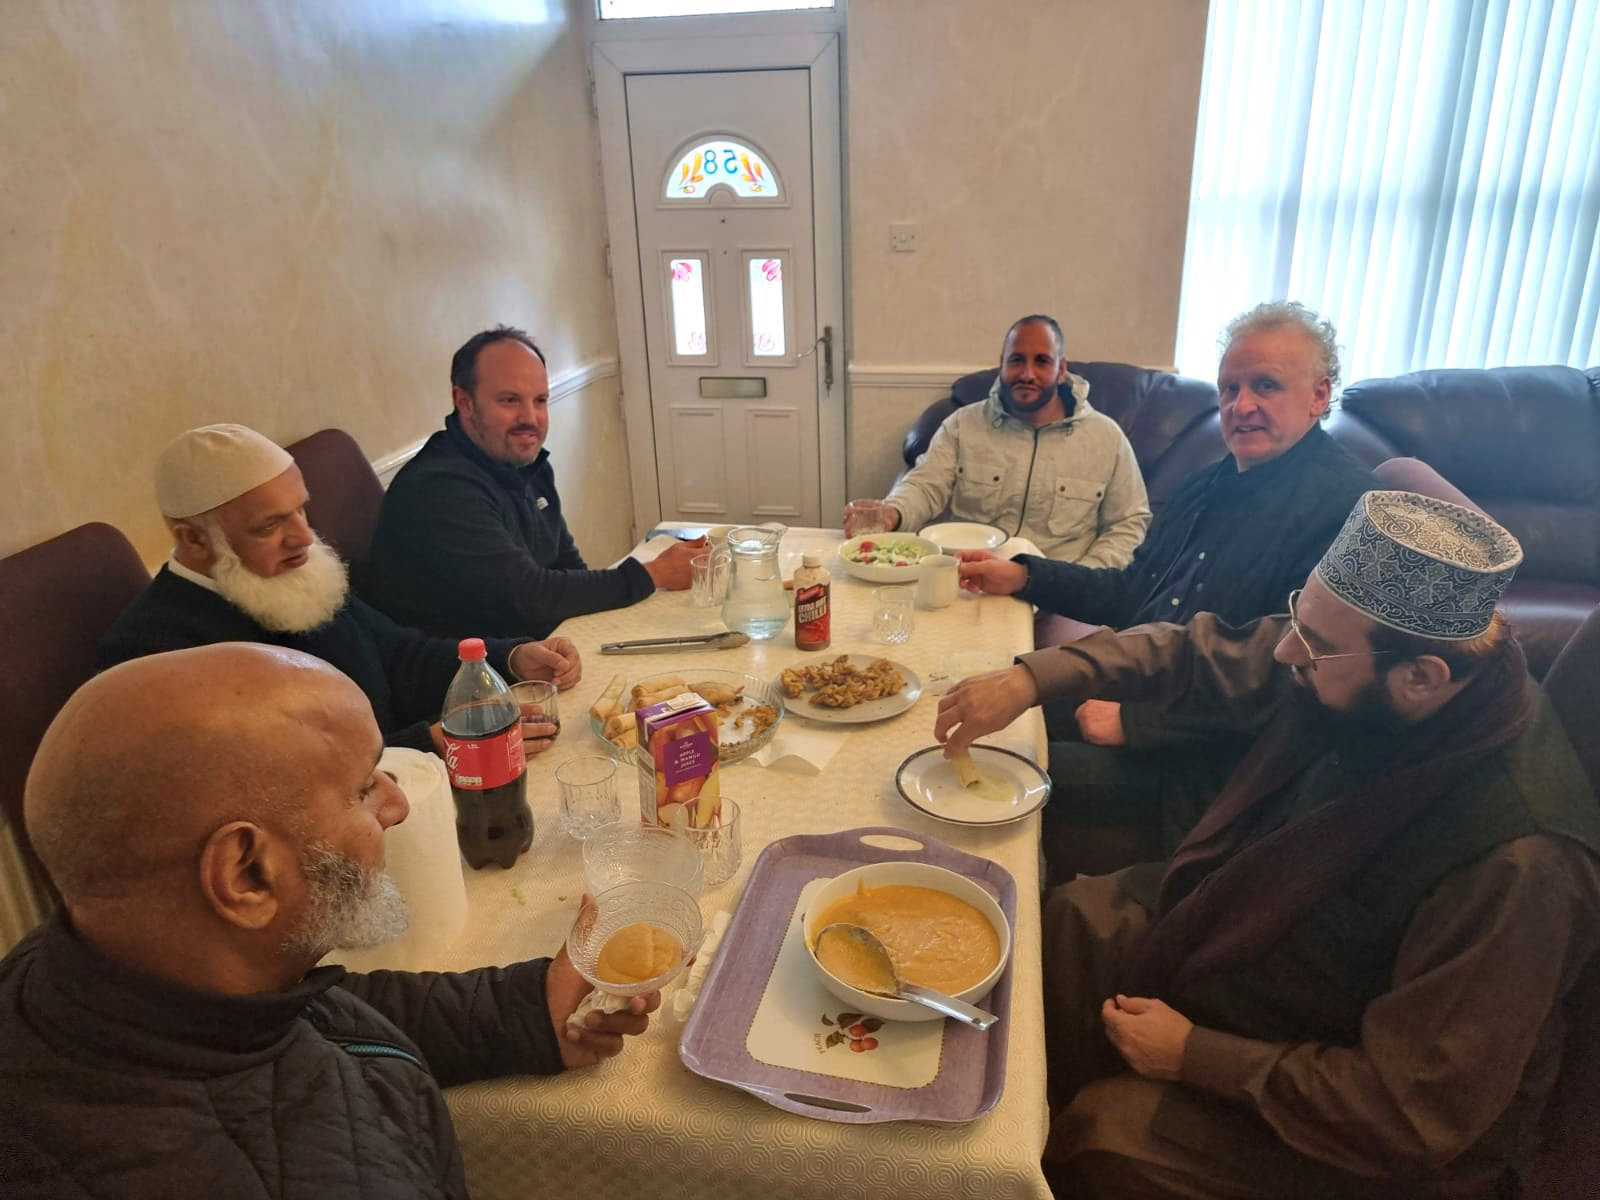 Friday 12th November, Keith Tordoff having lunch with worshippers following Friday prayers at Skipton Mosque